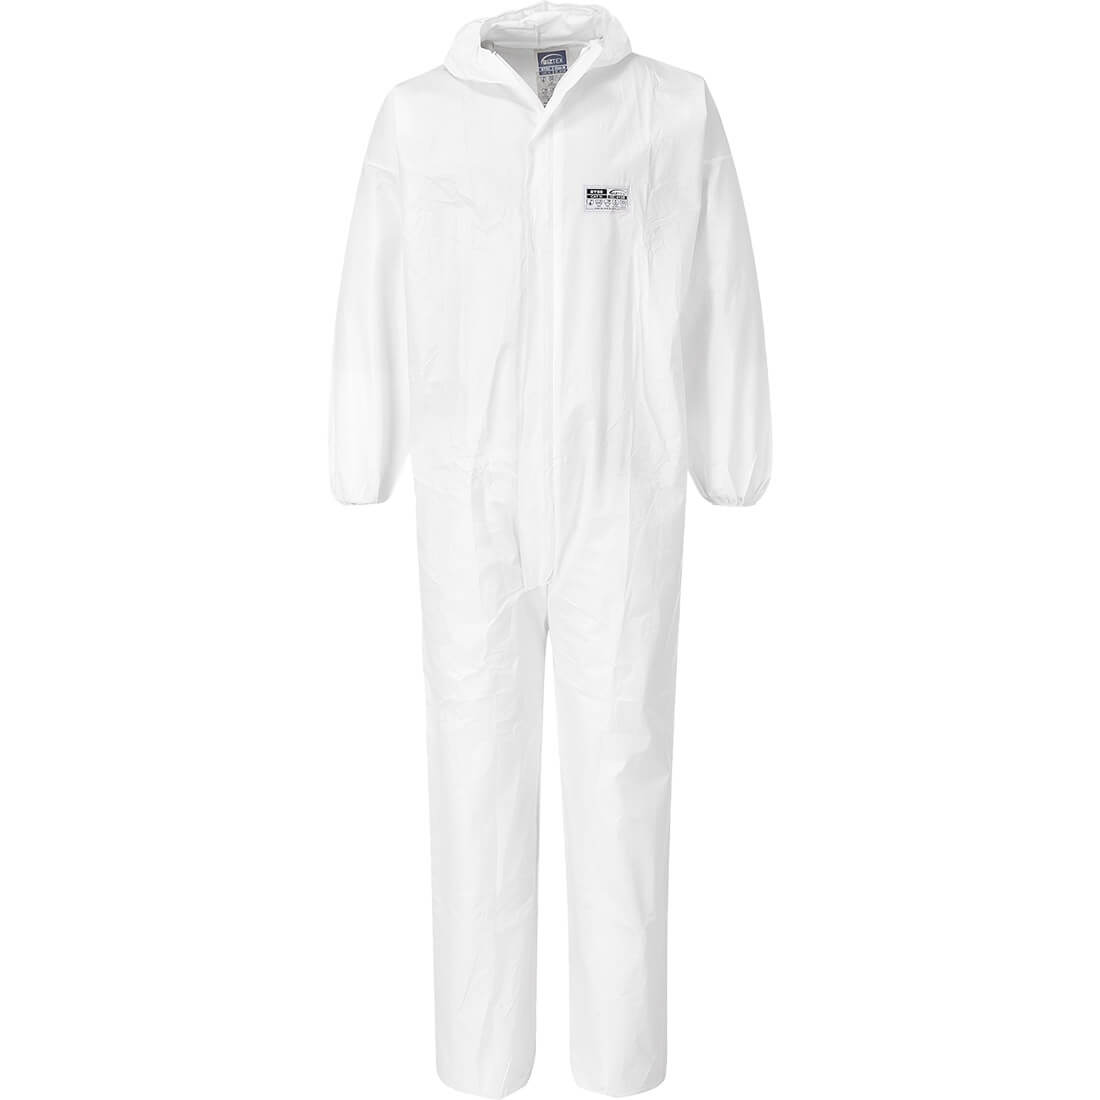 BizTex® Microcool 5/6 Coverall - Personal protection